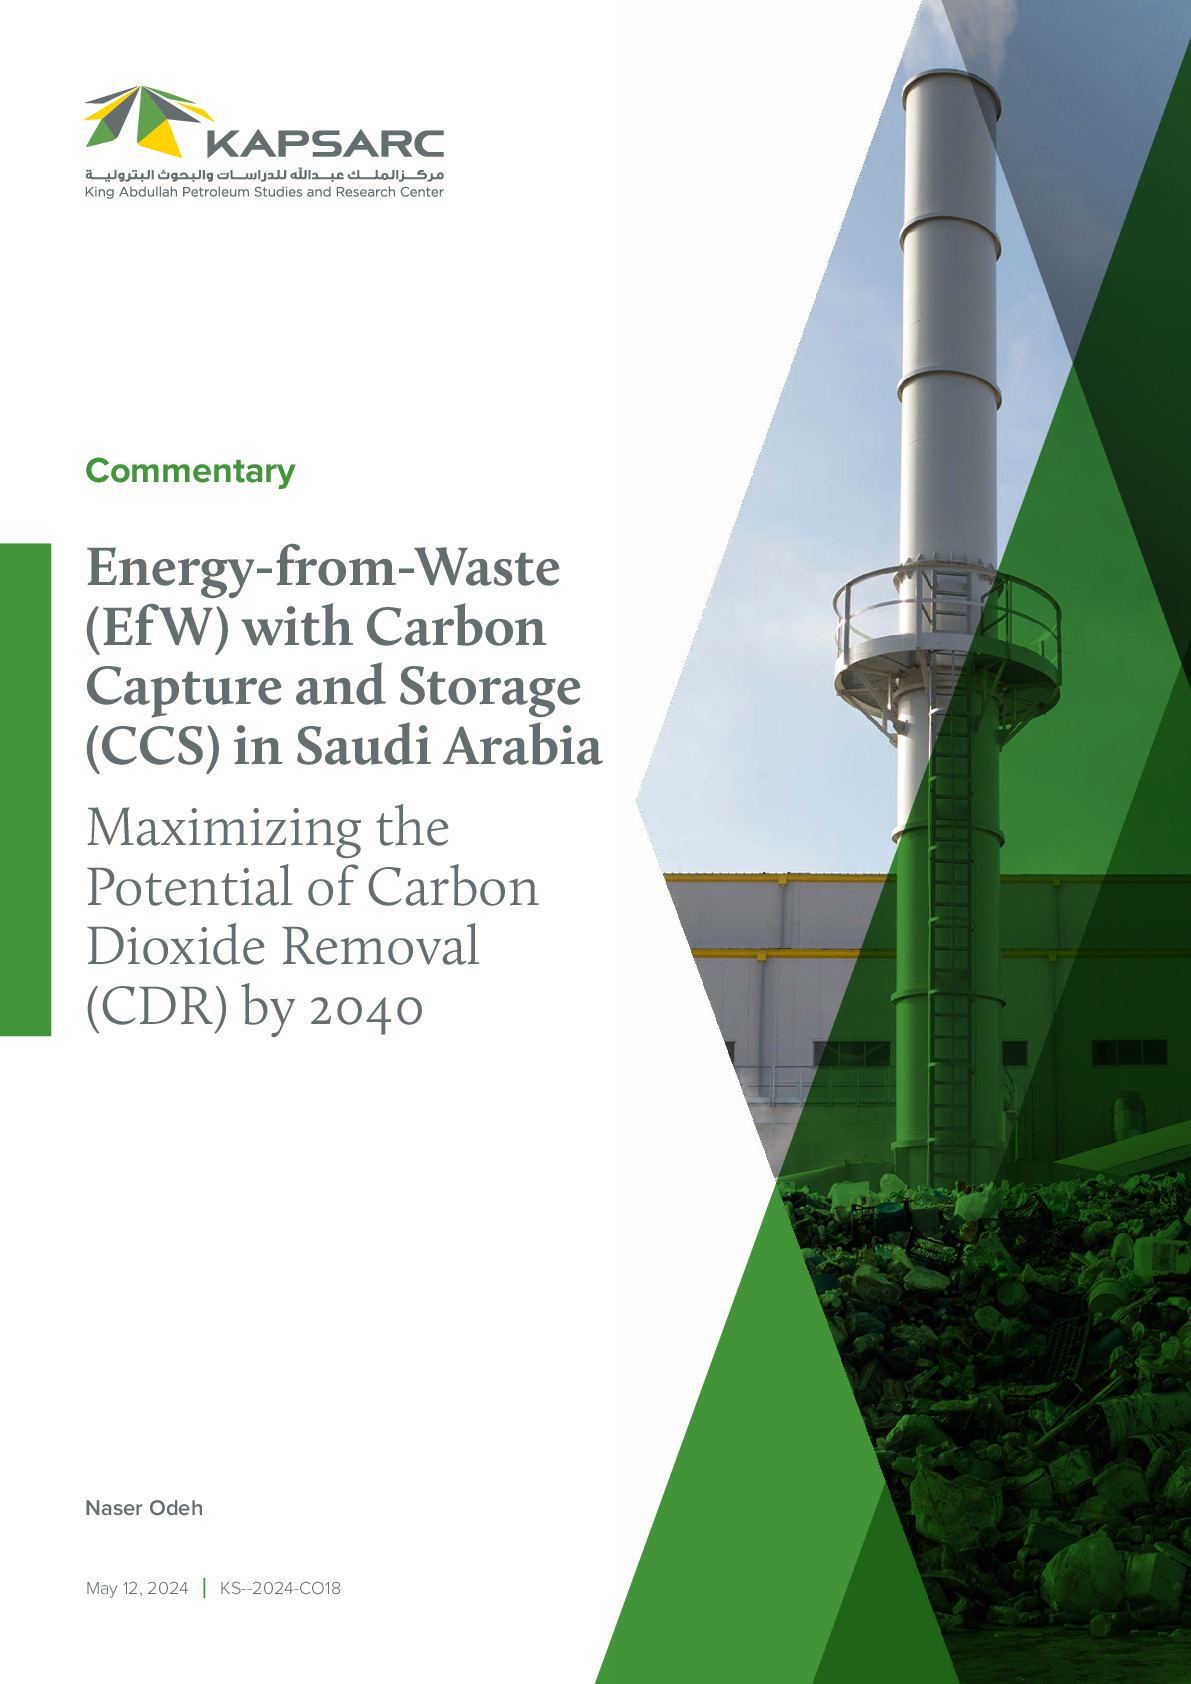 Energy-from-Waste (Ef W) with Carbon Capture and Storage (CCS) in Saudi Arabia